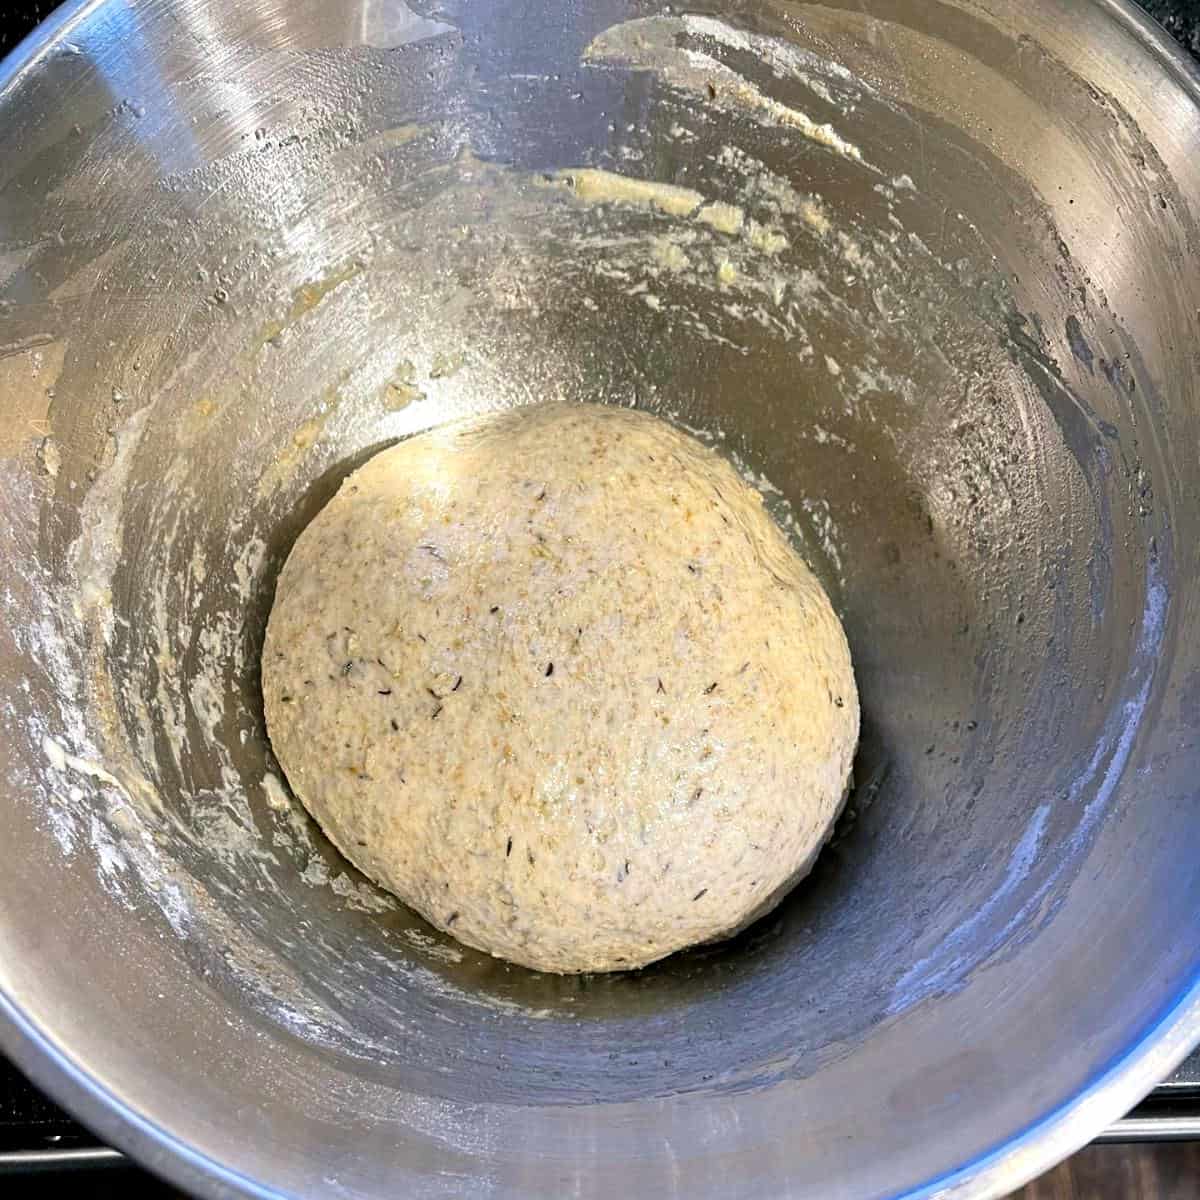 Rye bread dough in bowl before rising.